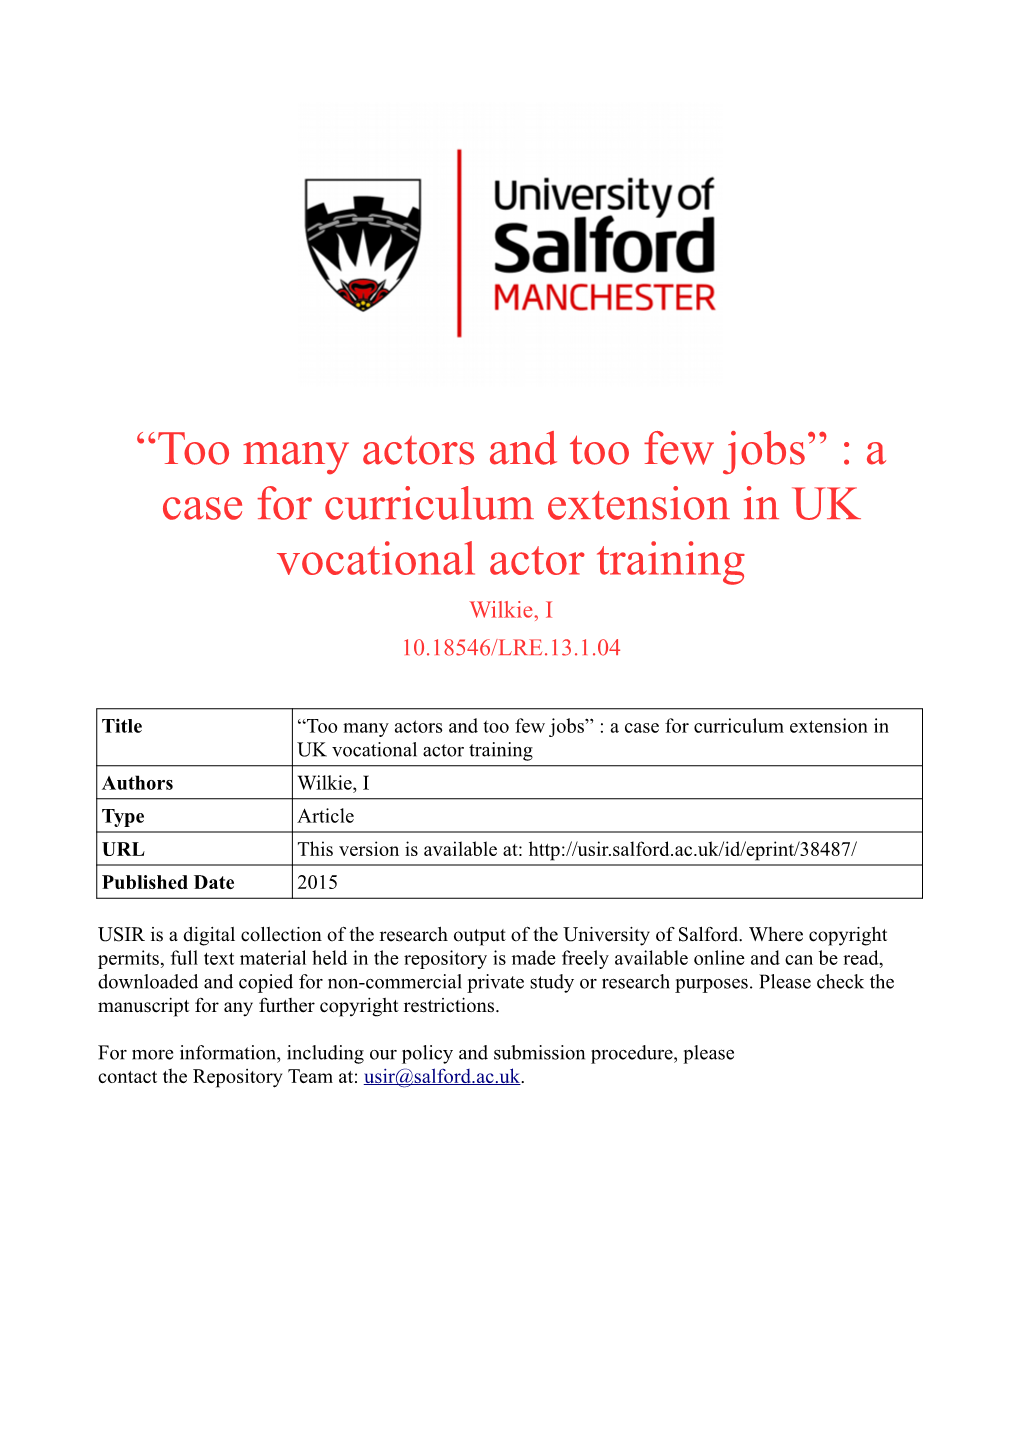 A Case for Curriculum Extension in UK Vocational Actor Training Wilkie, I 10.18546/LRE.13.1.04